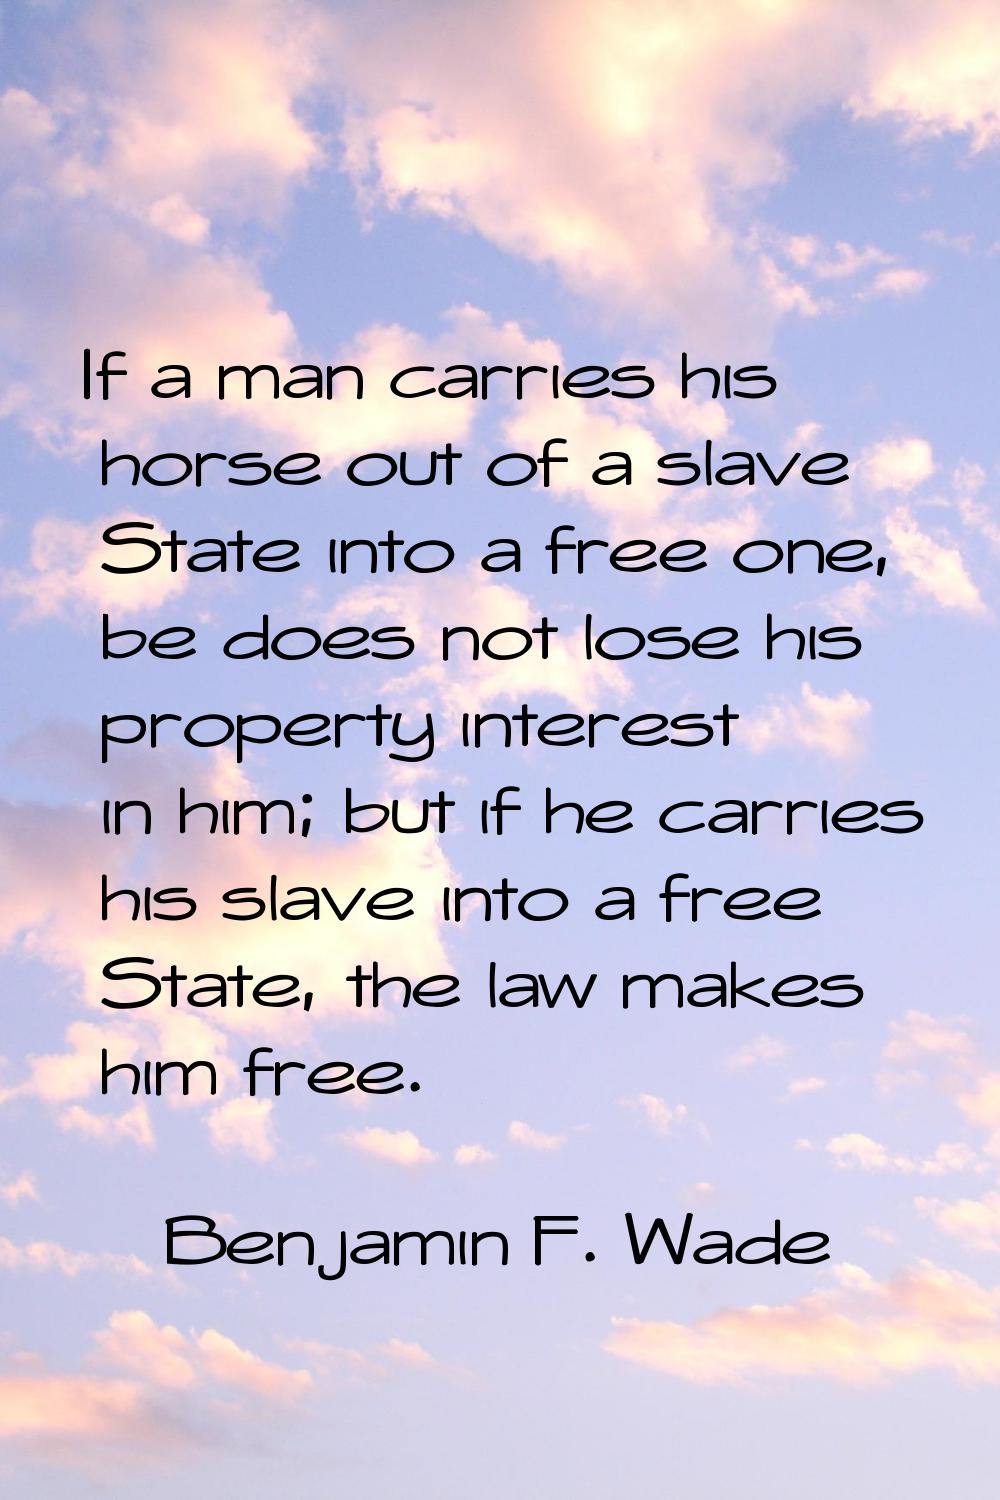 If a man carries his horse out of a slave State into a free one, be does not lose his property inte